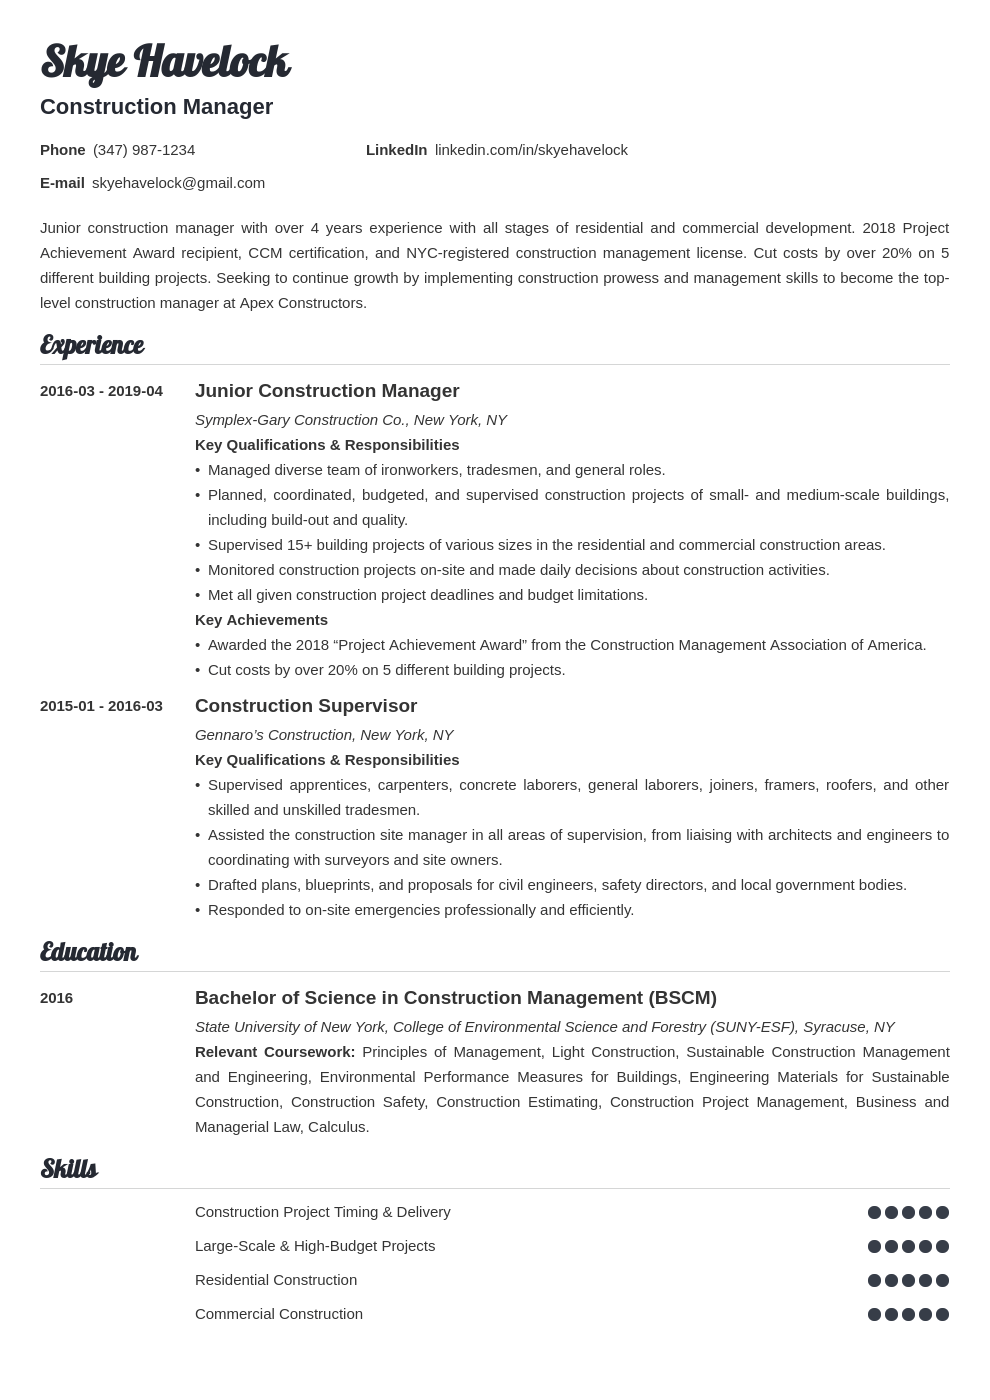 Construction Manager Resume Sample [+Objective & Skills] With Regard To Construction Project Manager Job Description Template With Construction Project Manager Job Description Template